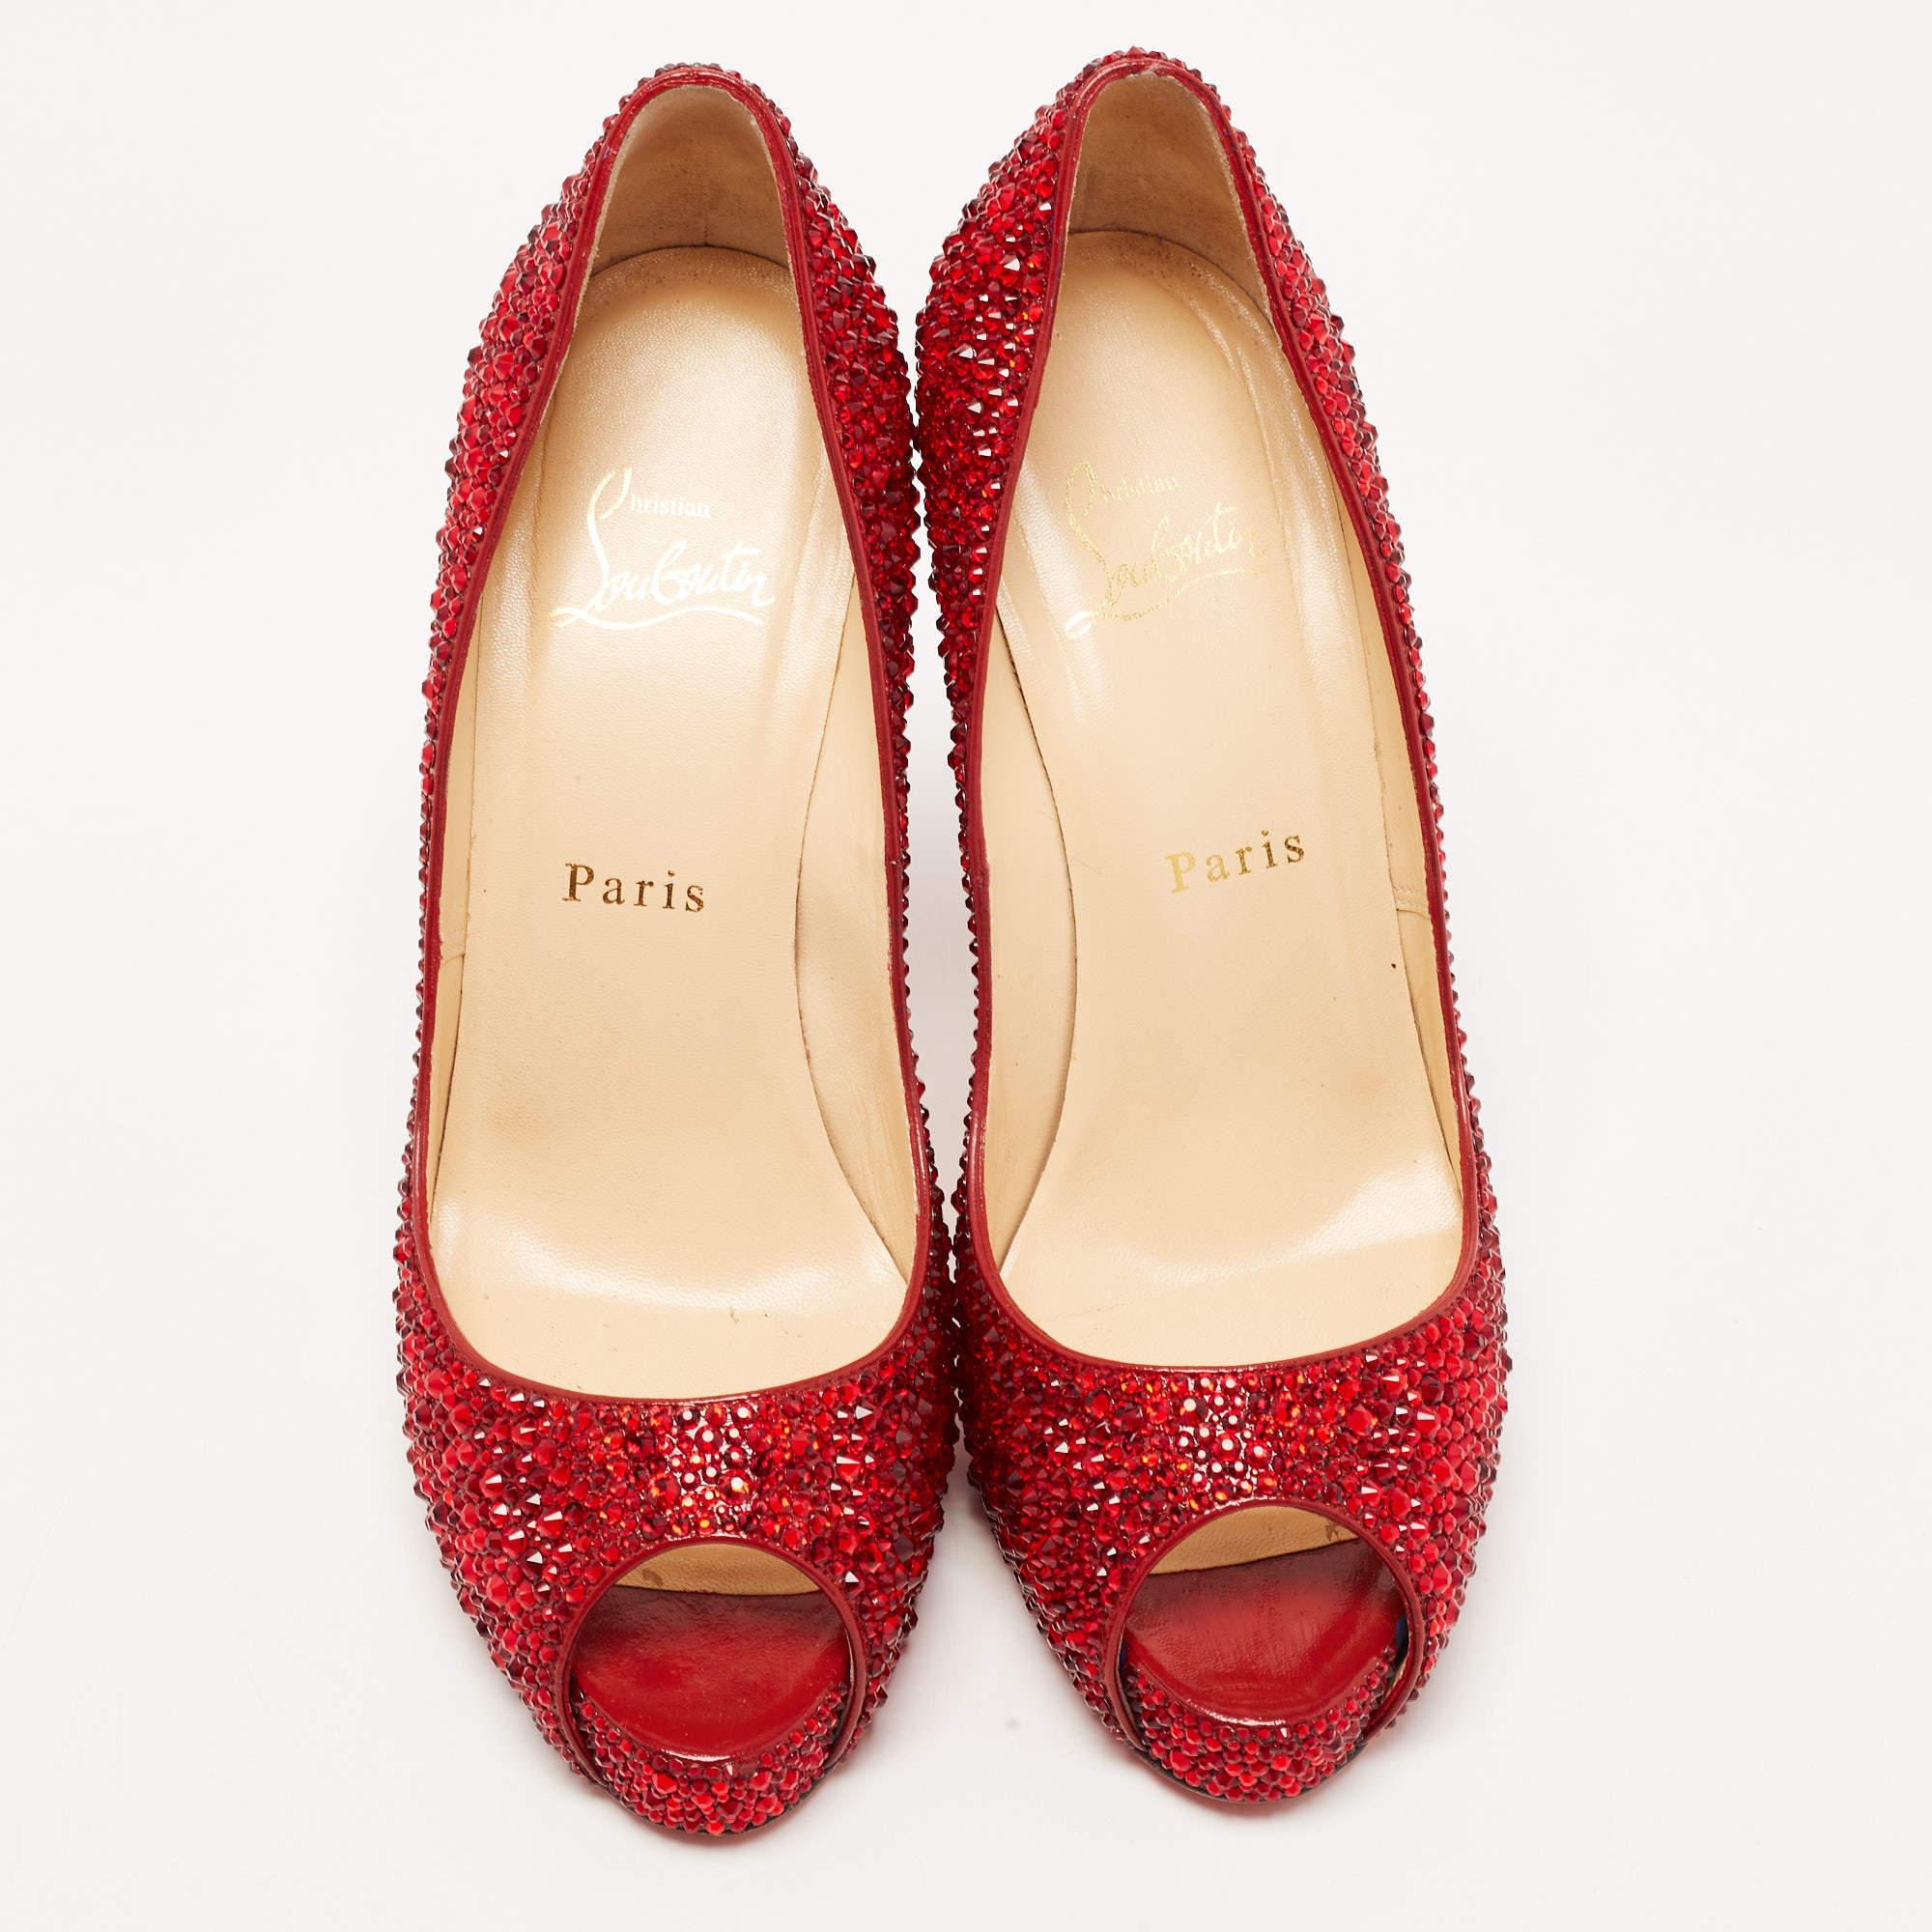 Christian Louboutin Red Leather Strass Very Prive Pumps Size 37.5 In Good Condition For Sale In Dubai, Al Qouz 2